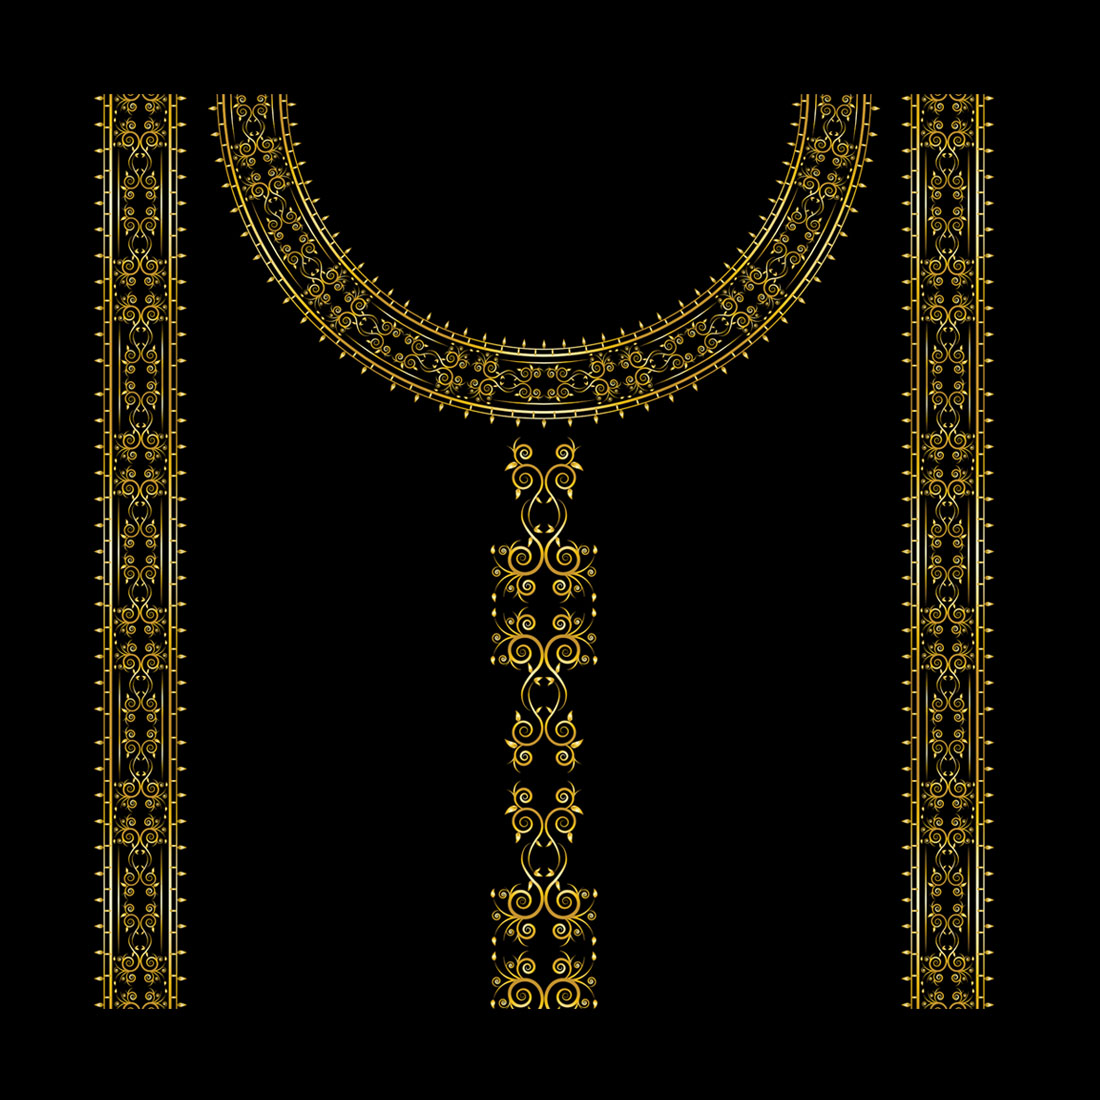 Golden Woman Dress Ornament Frame Design Vector Around Neck and Chest.